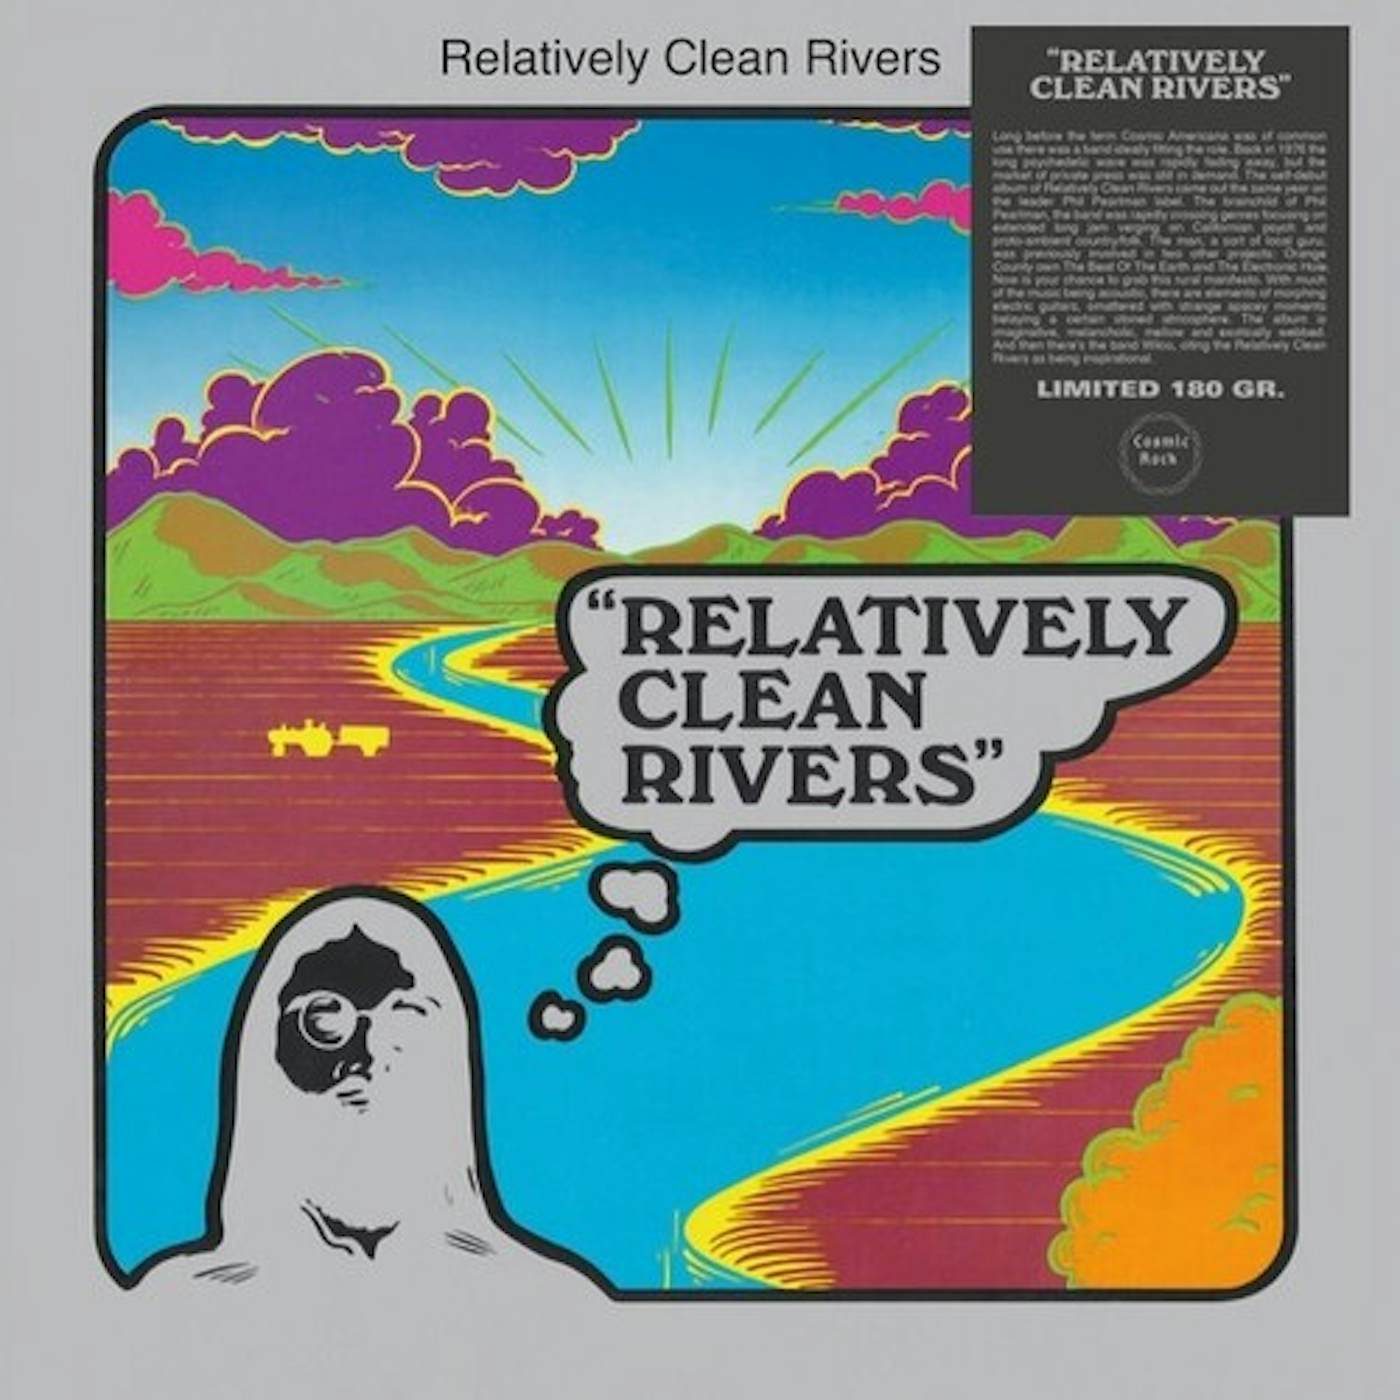 RELATIVELY CLEAN RIVERS Vinyl Record